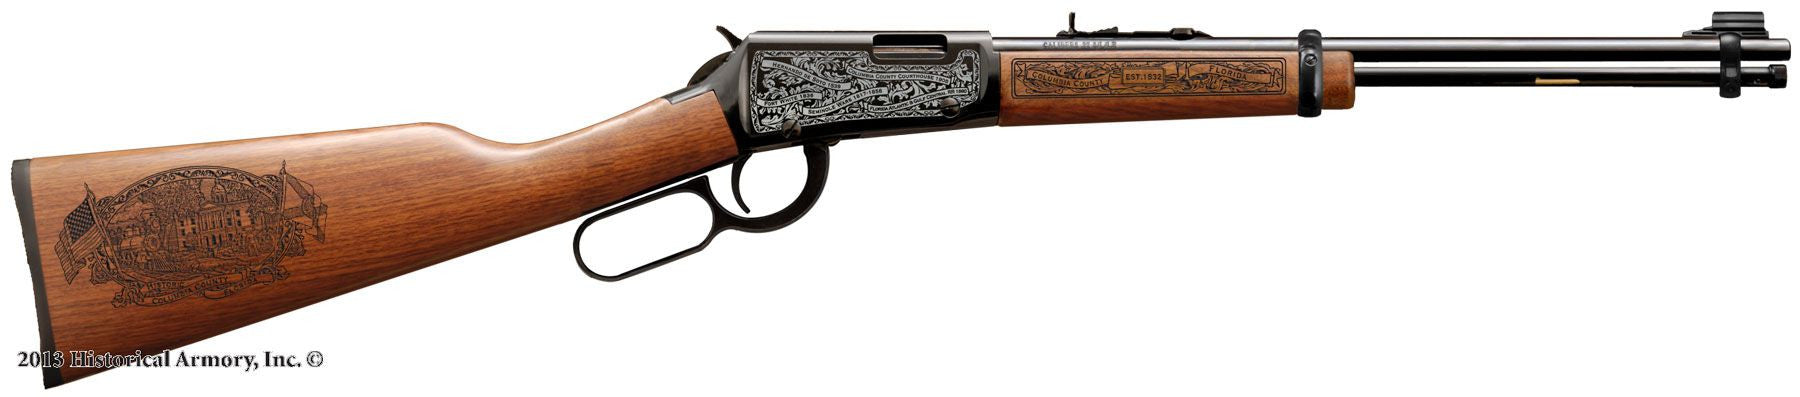 Columbia county florida engraved rifle H001